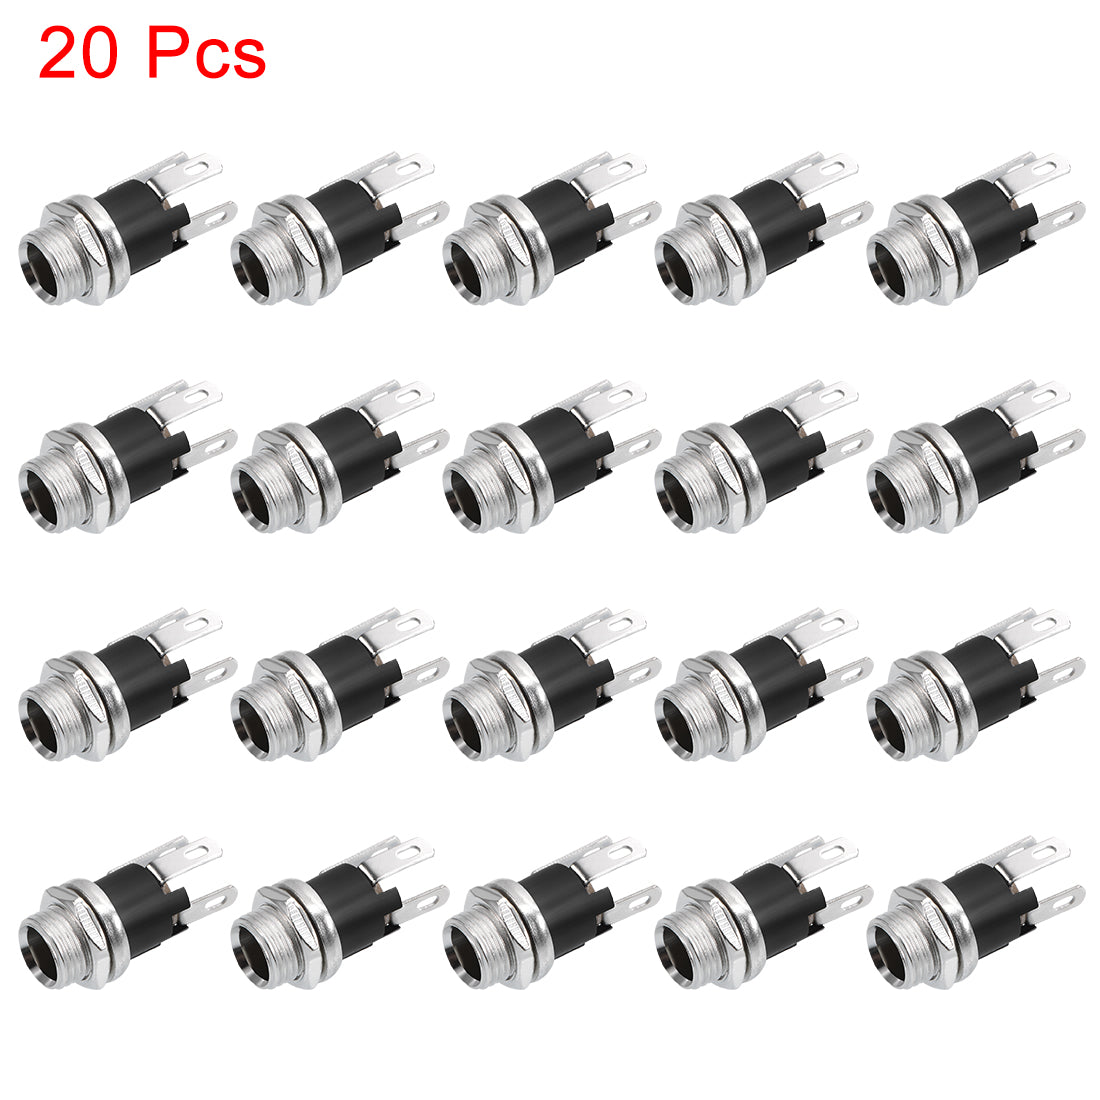 uxcell Uxcell 20Pcs PCB Mount DC Connector Jack Power Socket 3 Pin Female 5.5mm x 2.1mm Black